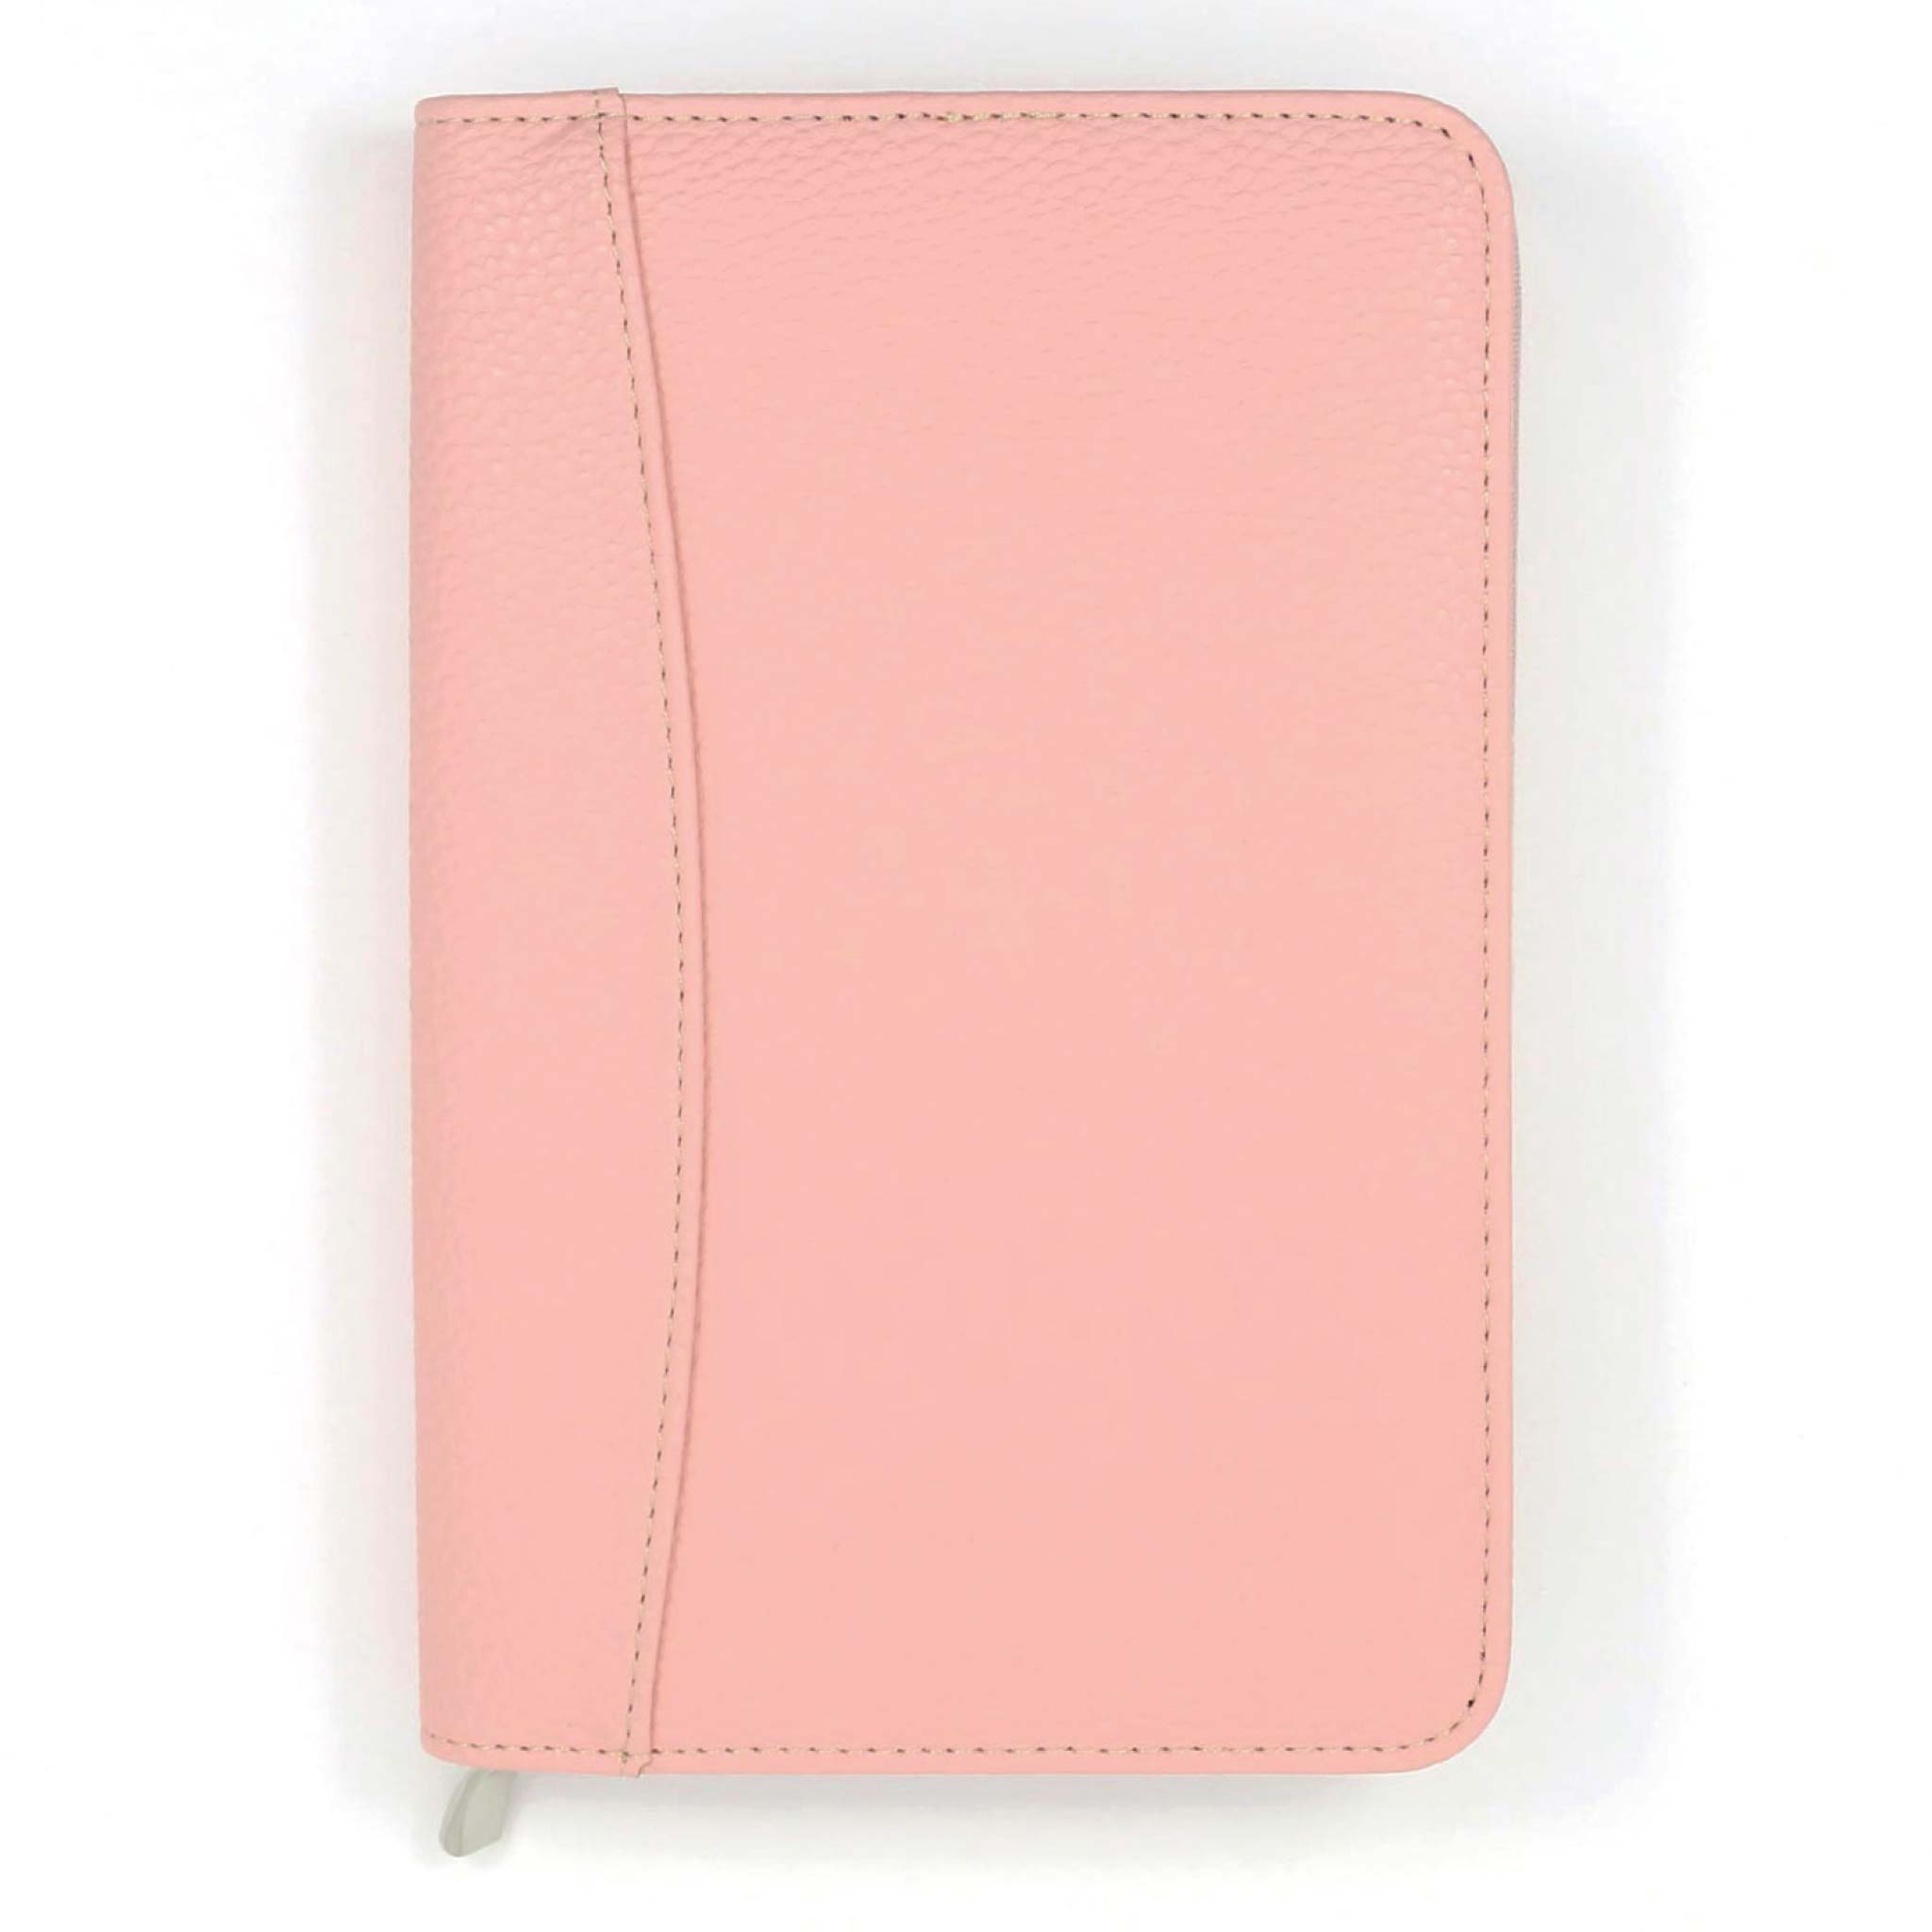 An image of Pocket Life Book Diary Cover I Full-Zip Slimline Cover with Pocket Bloom